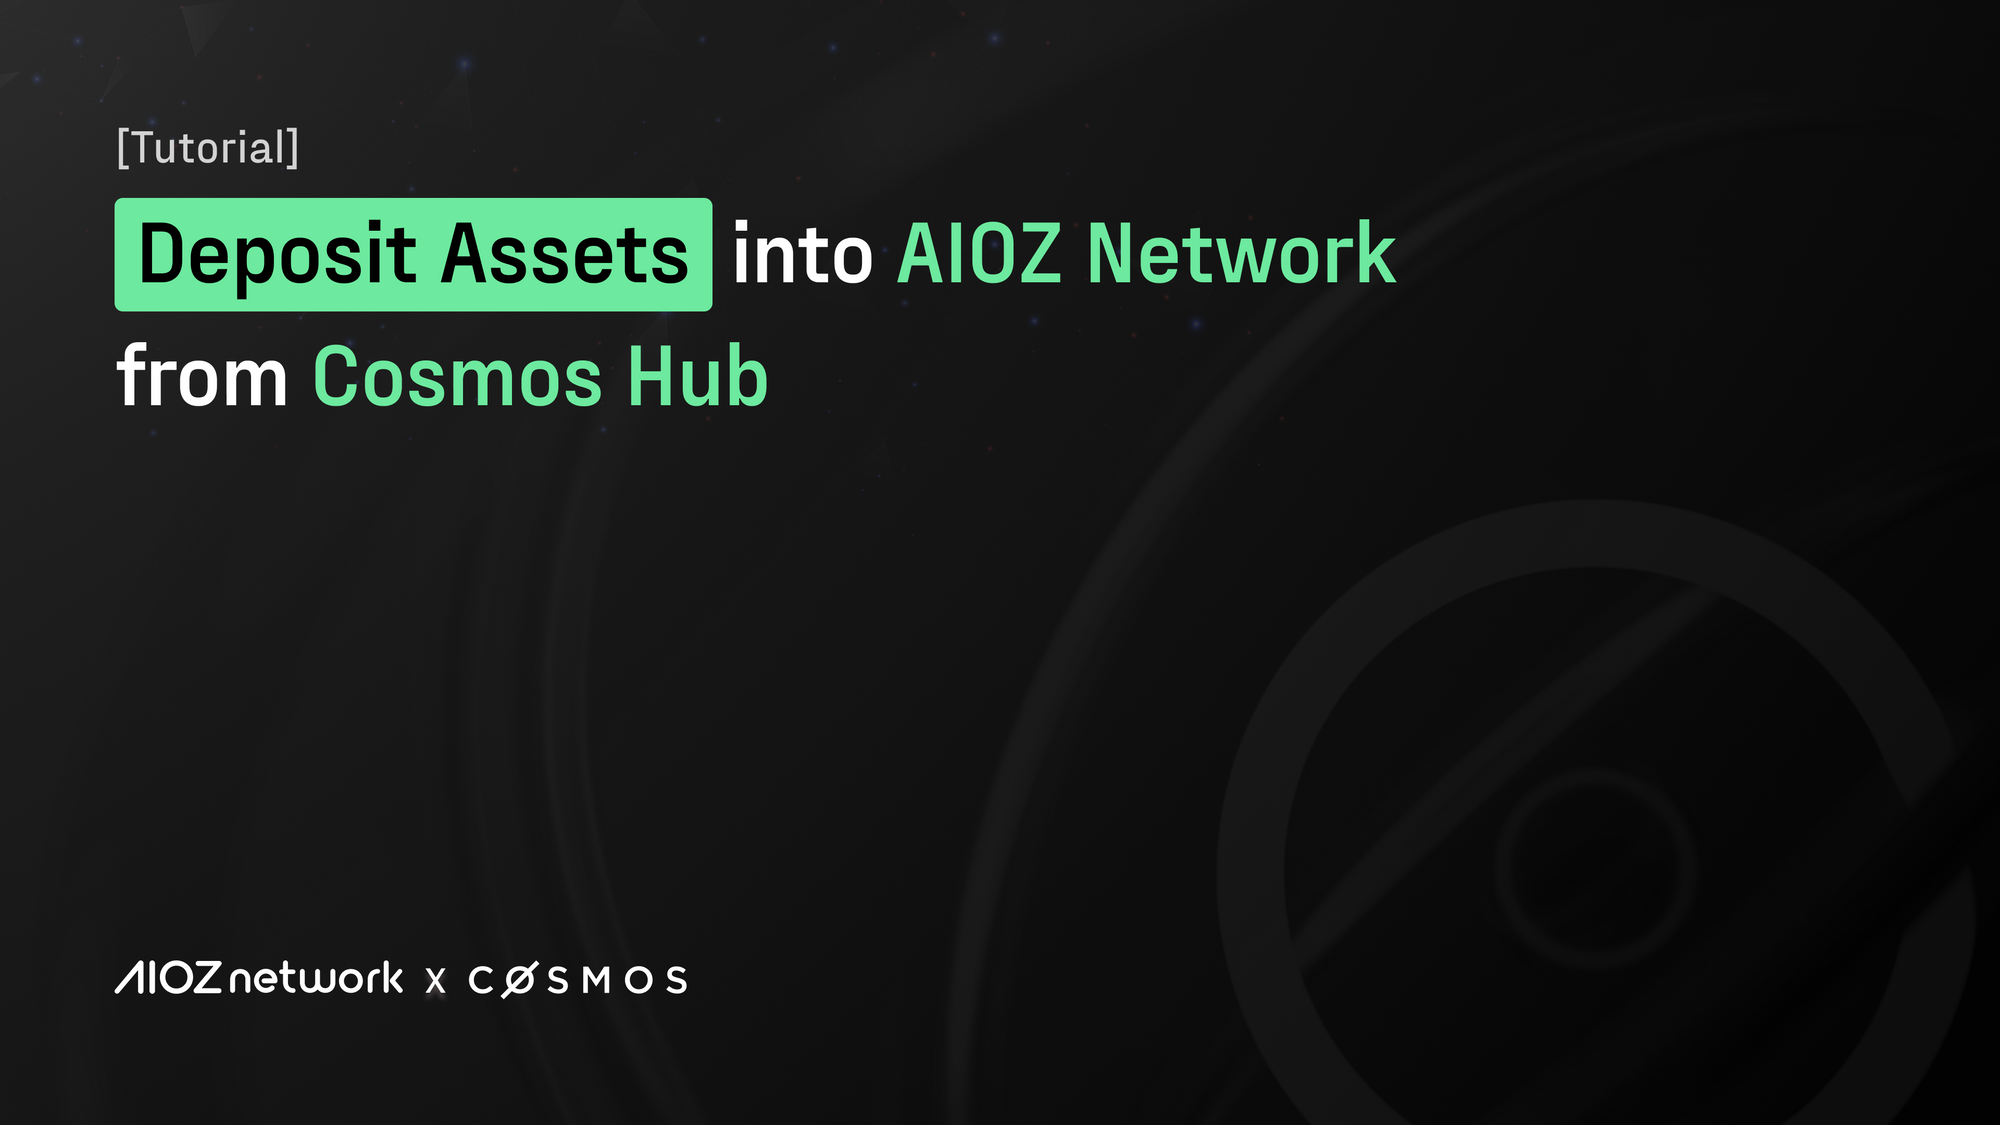 [Tutorial] Deposit Assets into AIOZ Network from Cosmos Hub